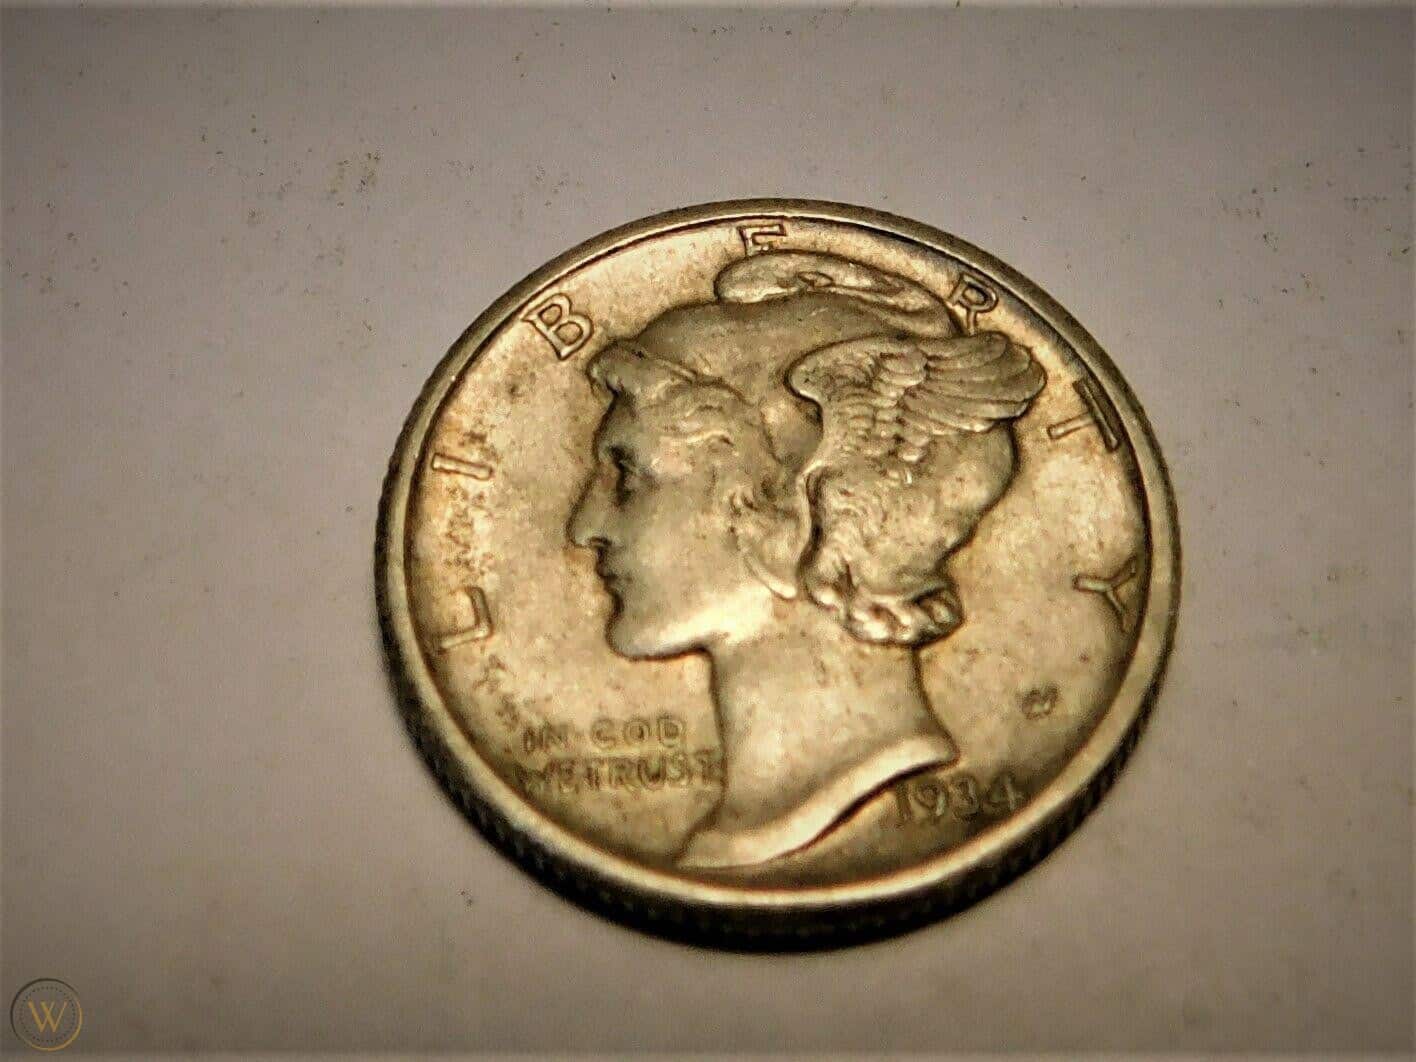 Value of the 1934 Dime